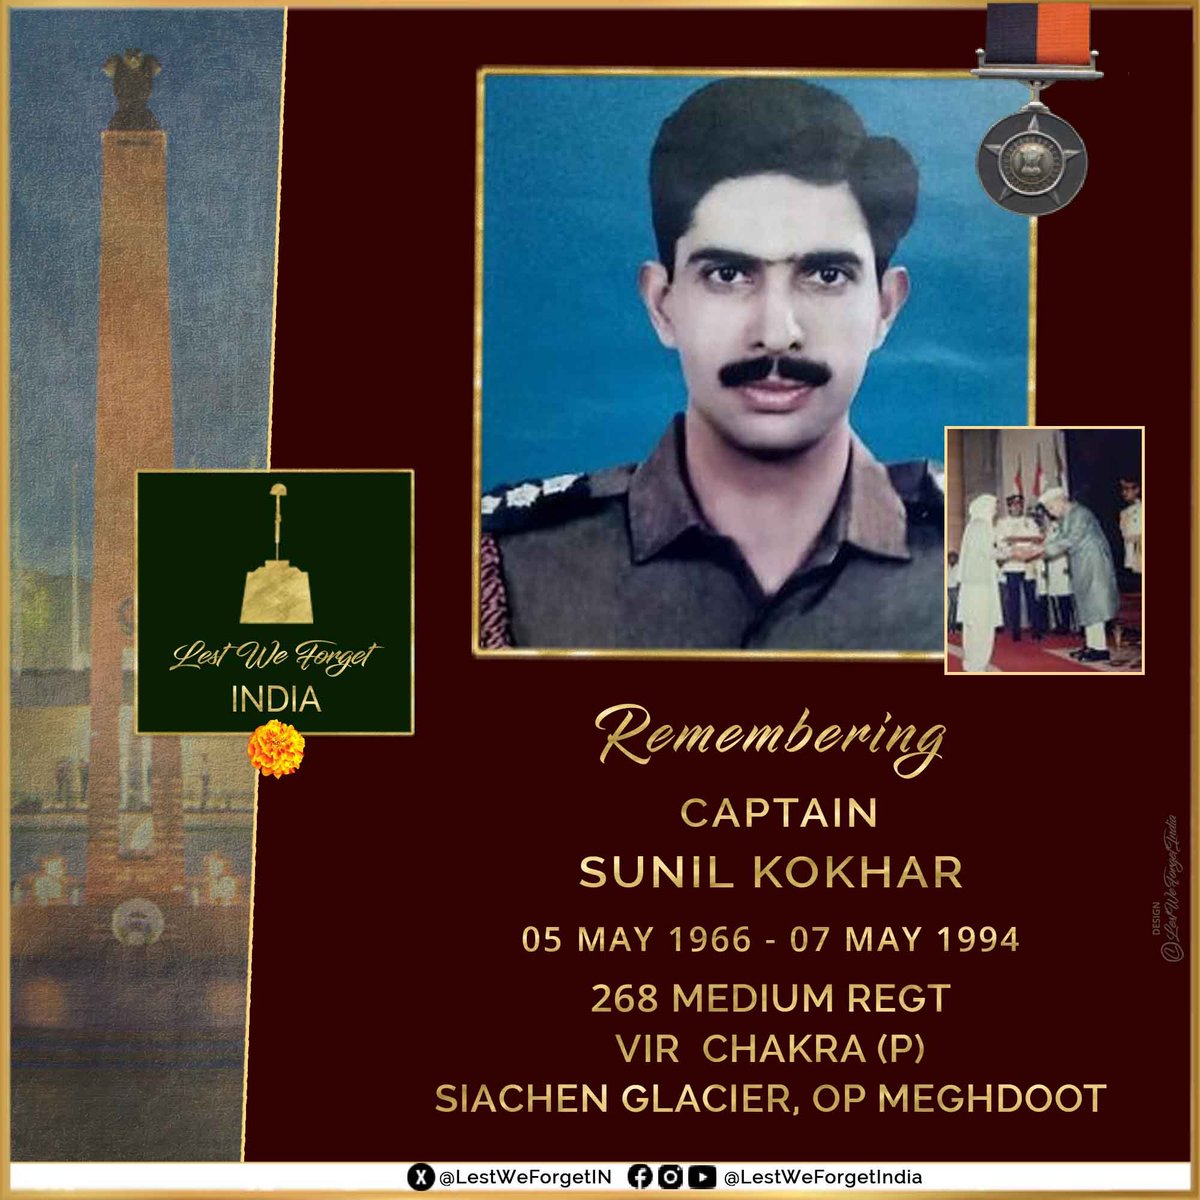 This #IndianBrave had just turned 28 two days before he made the supreme sacrifice. #LestWeForgetIndia🇮🇳 Captain Sunil Khokhar, Vir Chakra (P), 268 MED REGT laid down his life fighting against enemy action, #OnThisDay 07 May in 1994. Capt Khokhar, 268 Medium Regiment…